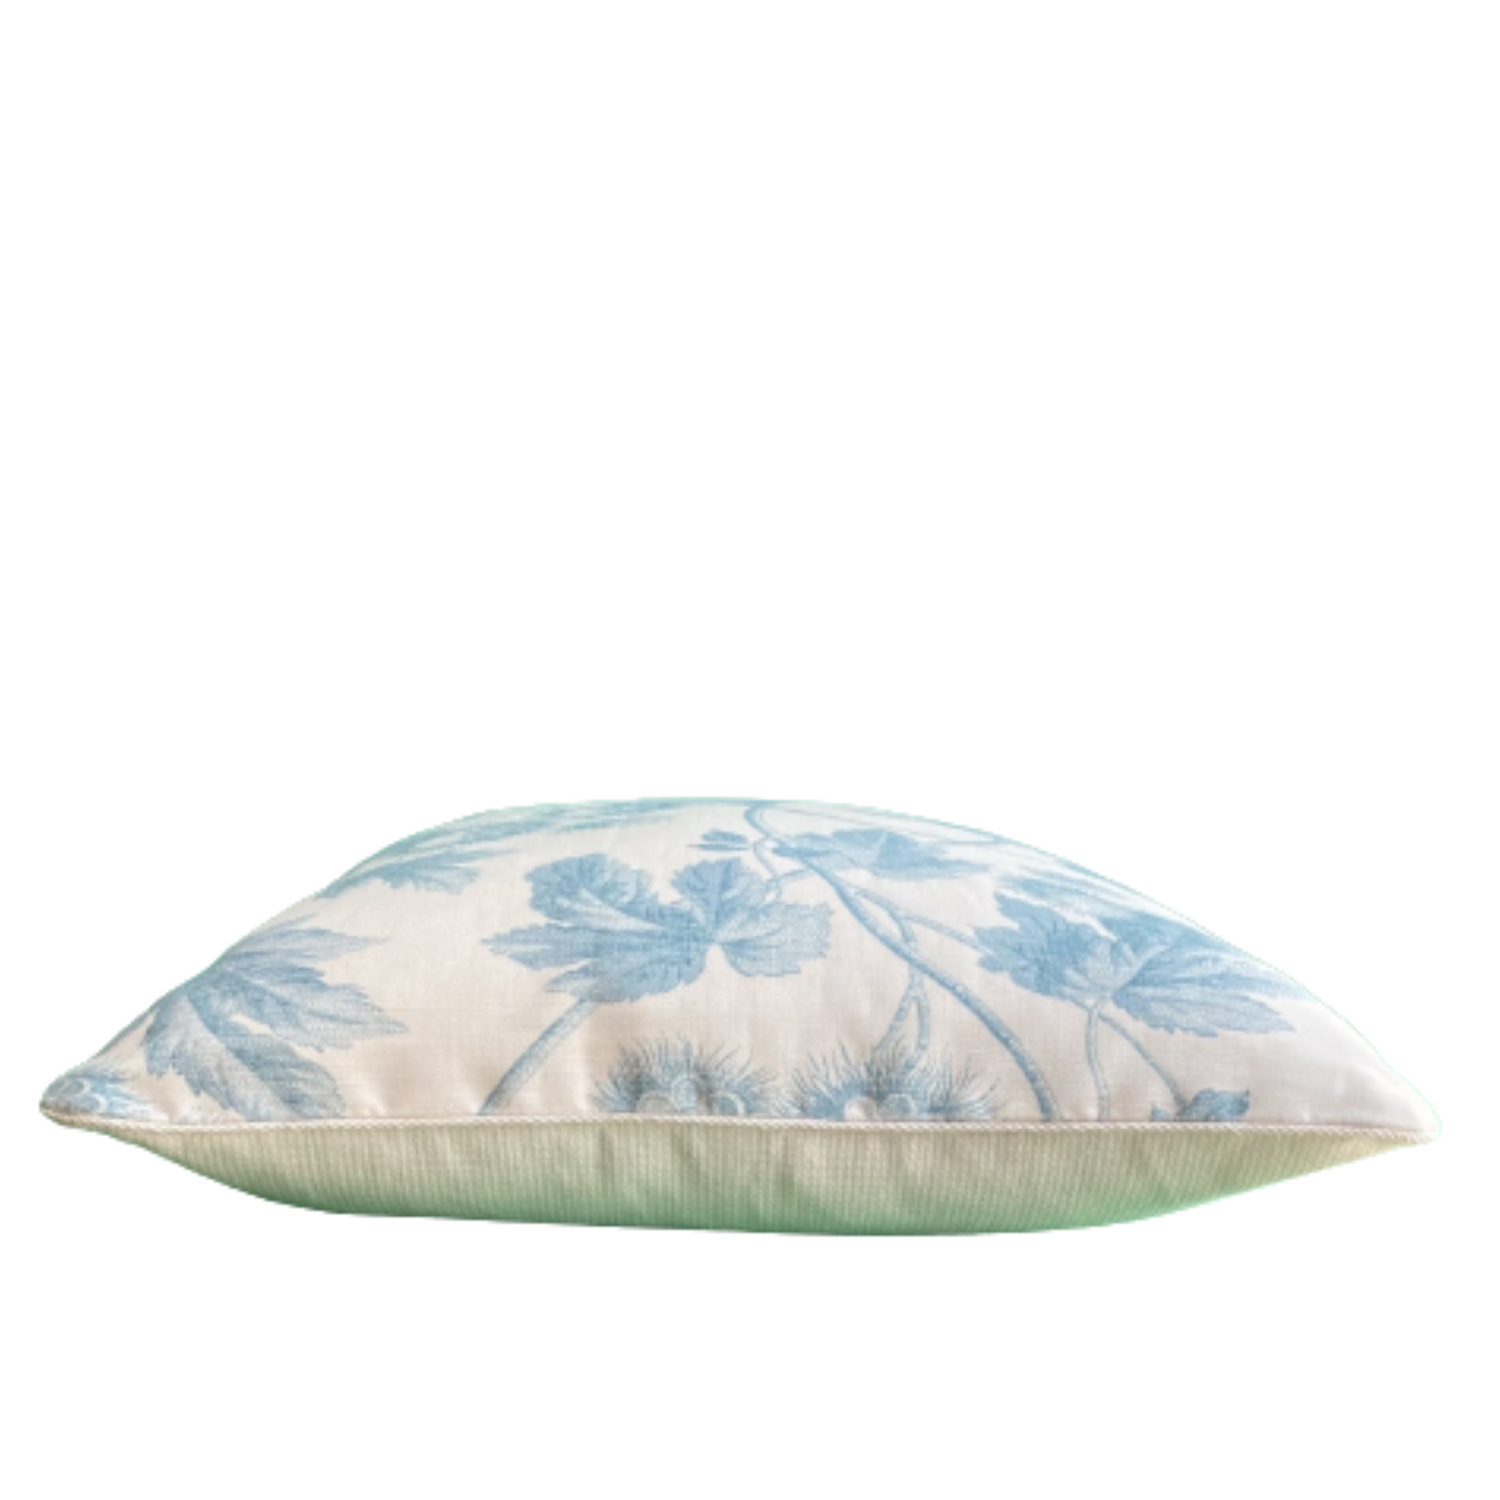 Virginia Summer Blue Toile Jane Churchill 20 x 20 Decorative Pillow with Down Feather Insert